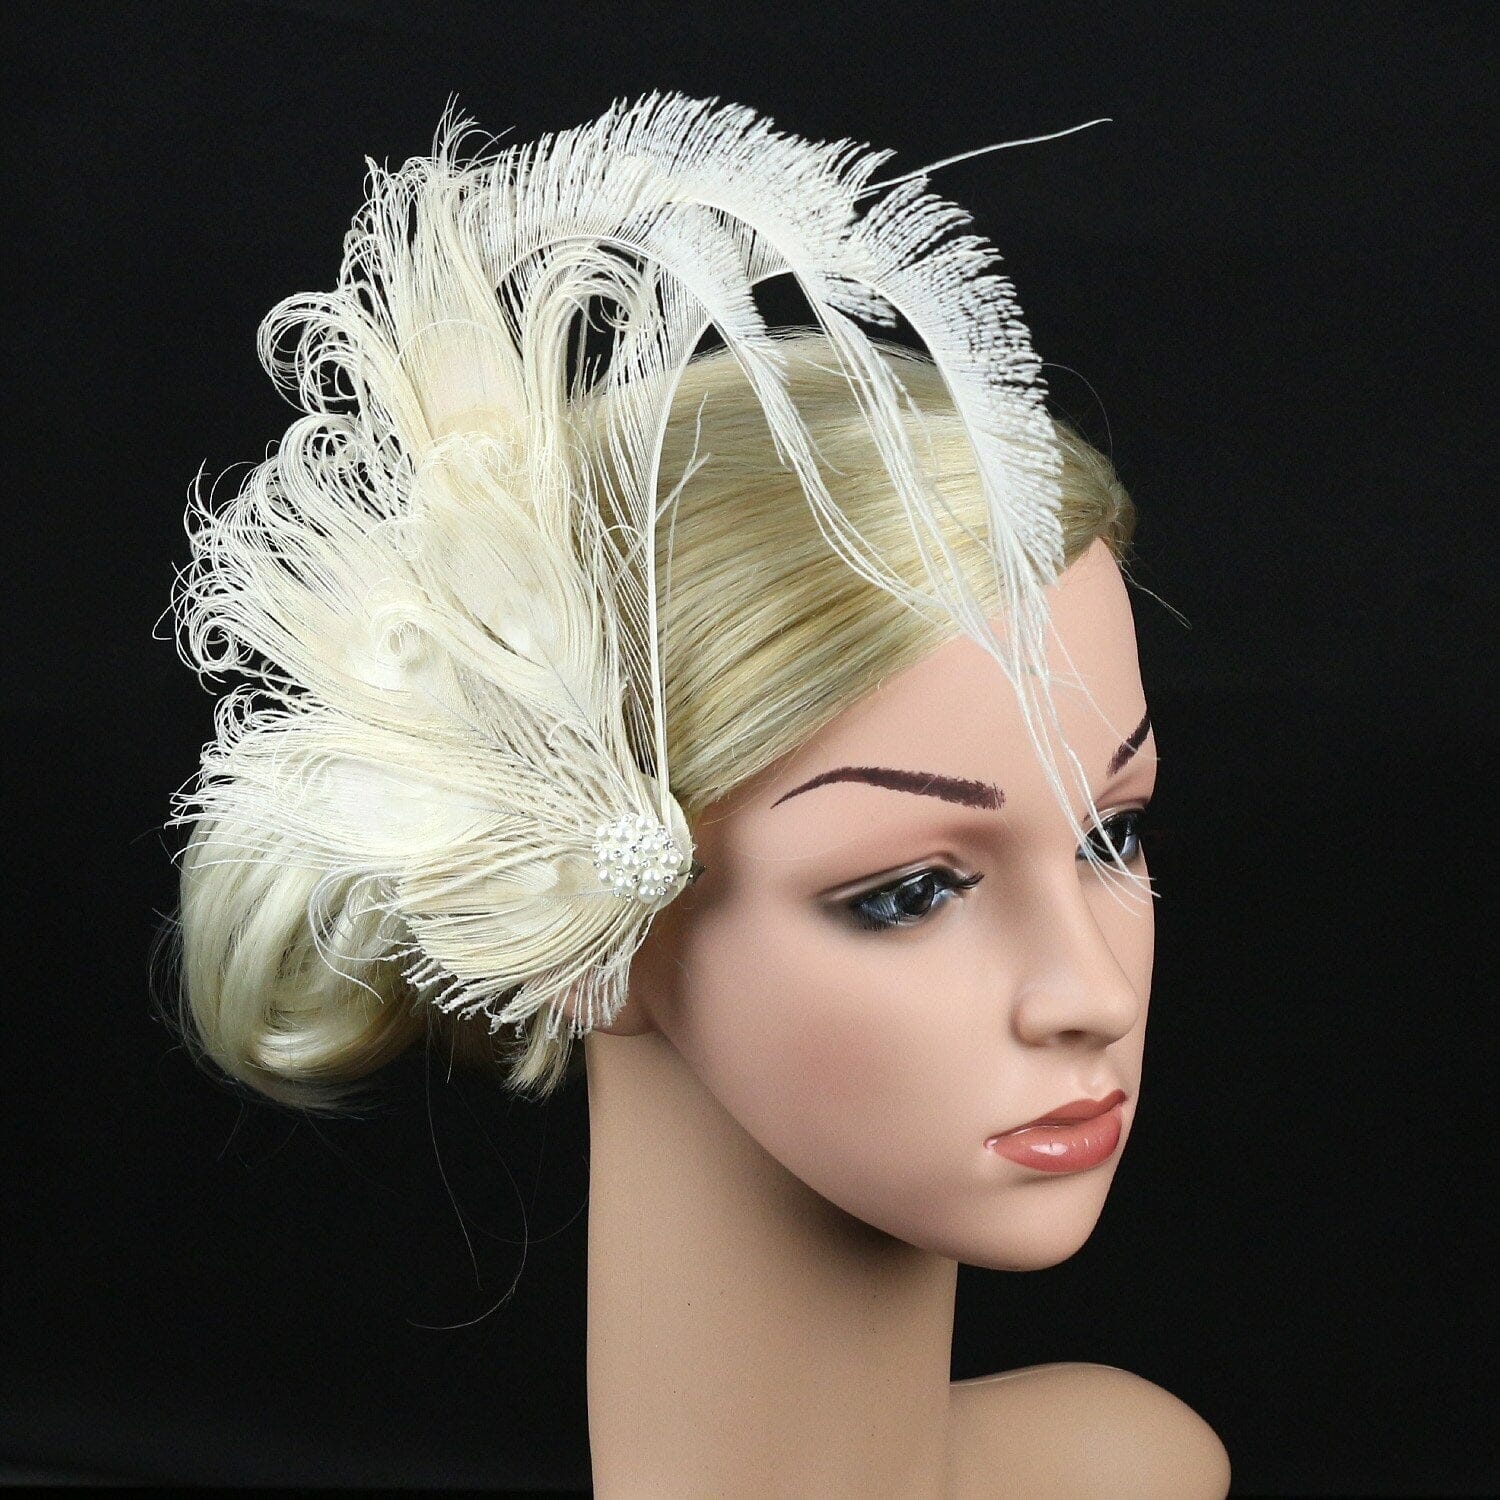 Women Peacock Feather Hair Clip with Pearl Rhinestone Fascinator 1920s Gatsby Headpiece Hat jehouze Ivory White 